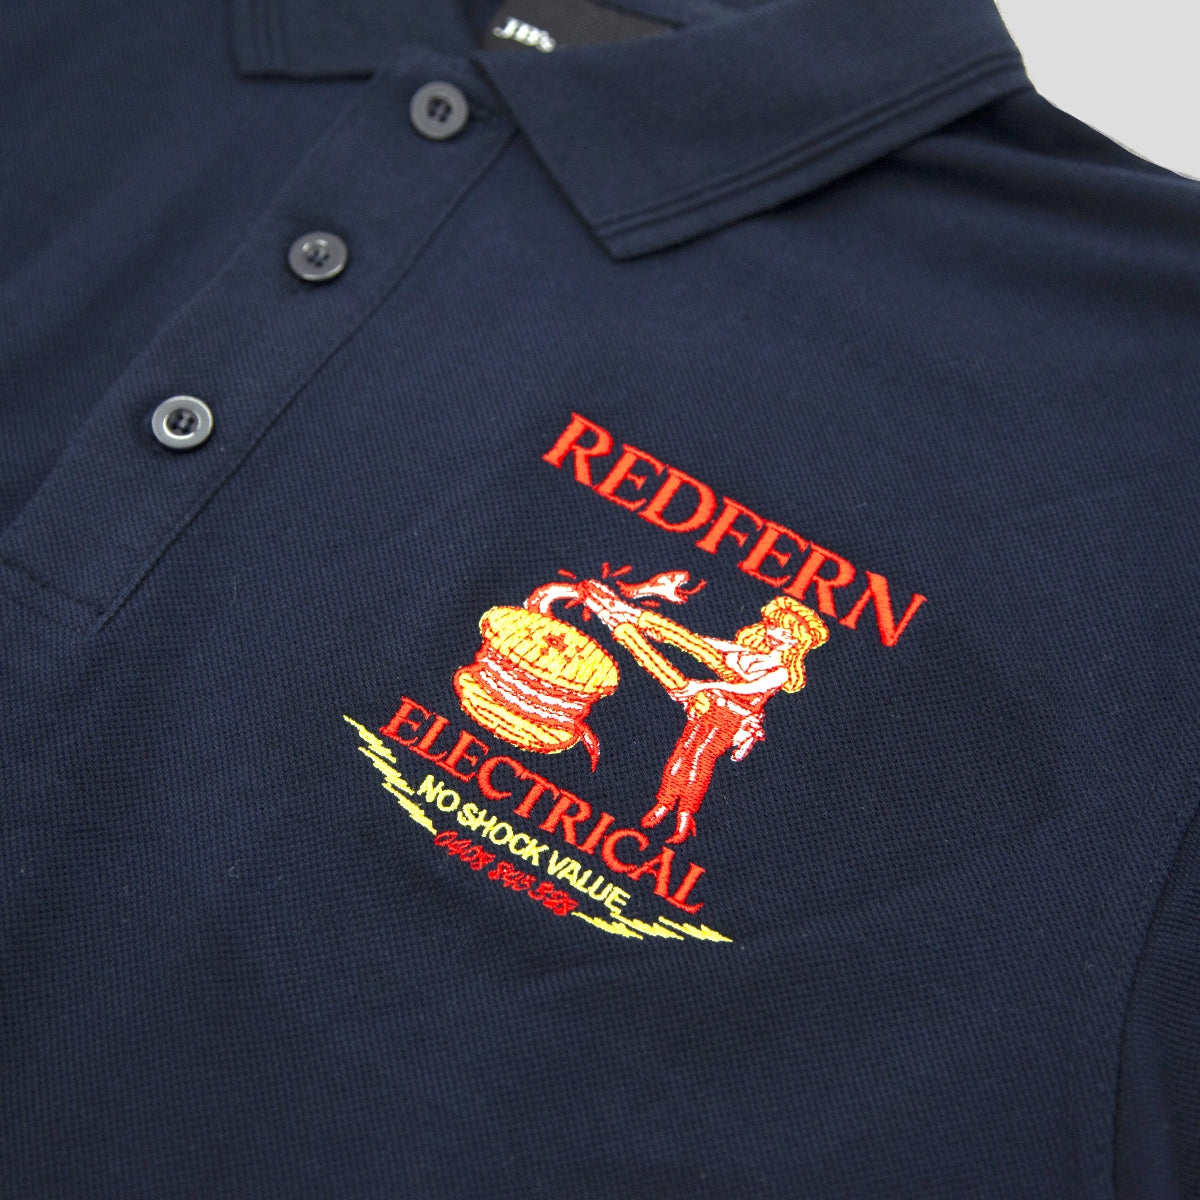 REDFERN ELECTRICAL "NO SHOCK VALUE" POLO NAVY